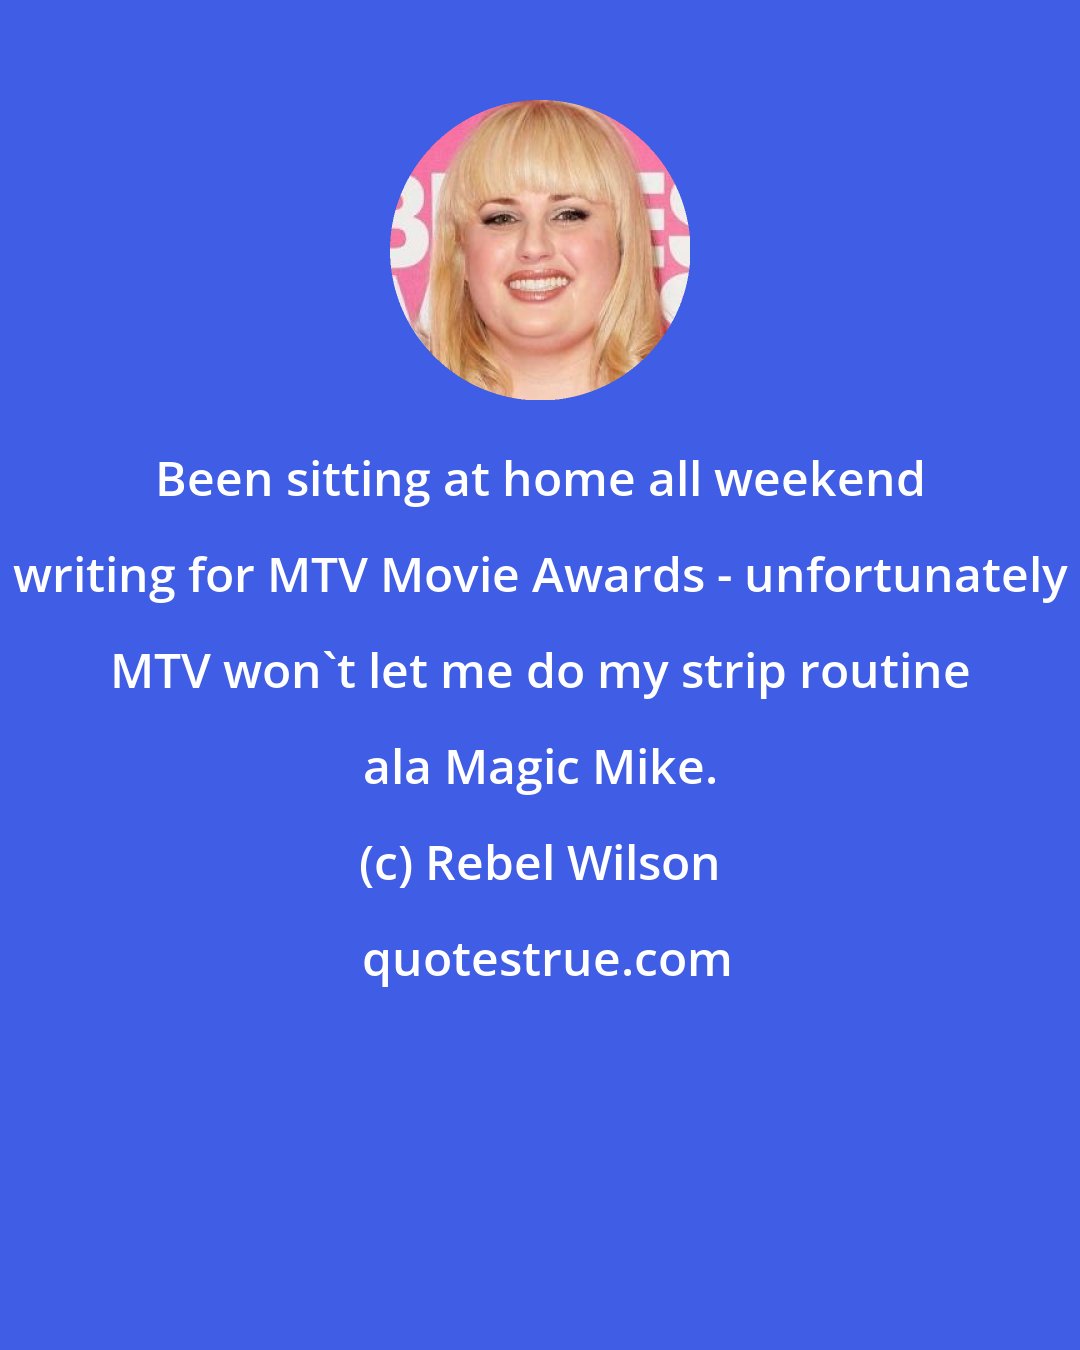 Rebel Wilson: Been sitting at home all weekend writing for MTV Movie Awards - unfortunately MTV won't let me do my strip routine ala Magic Mike.